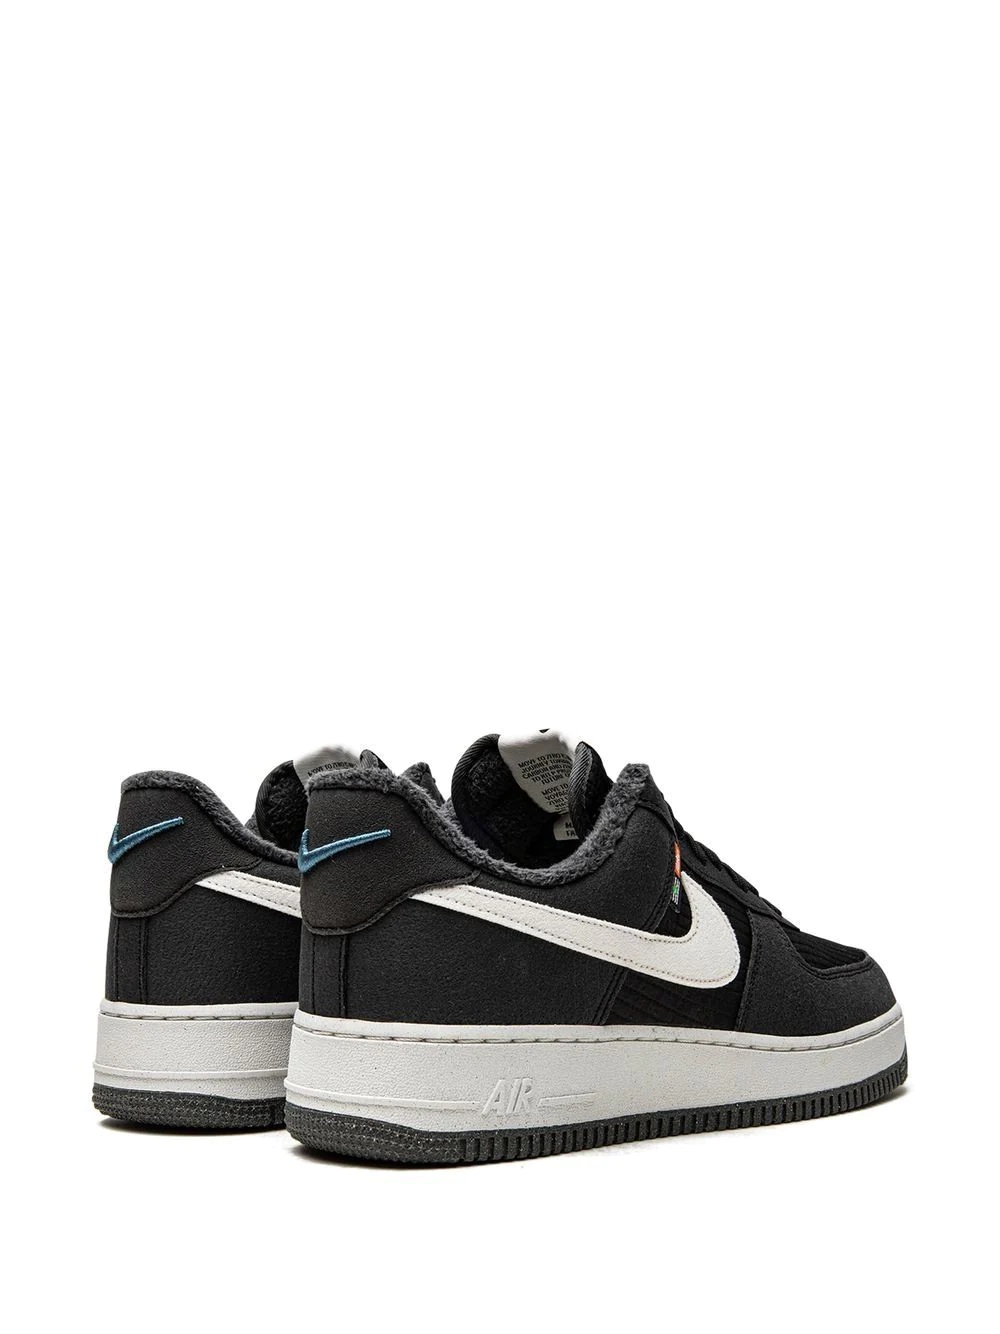 Air Force 1 '07 LV8 NN "Toasty Black/White" sneakers - 3